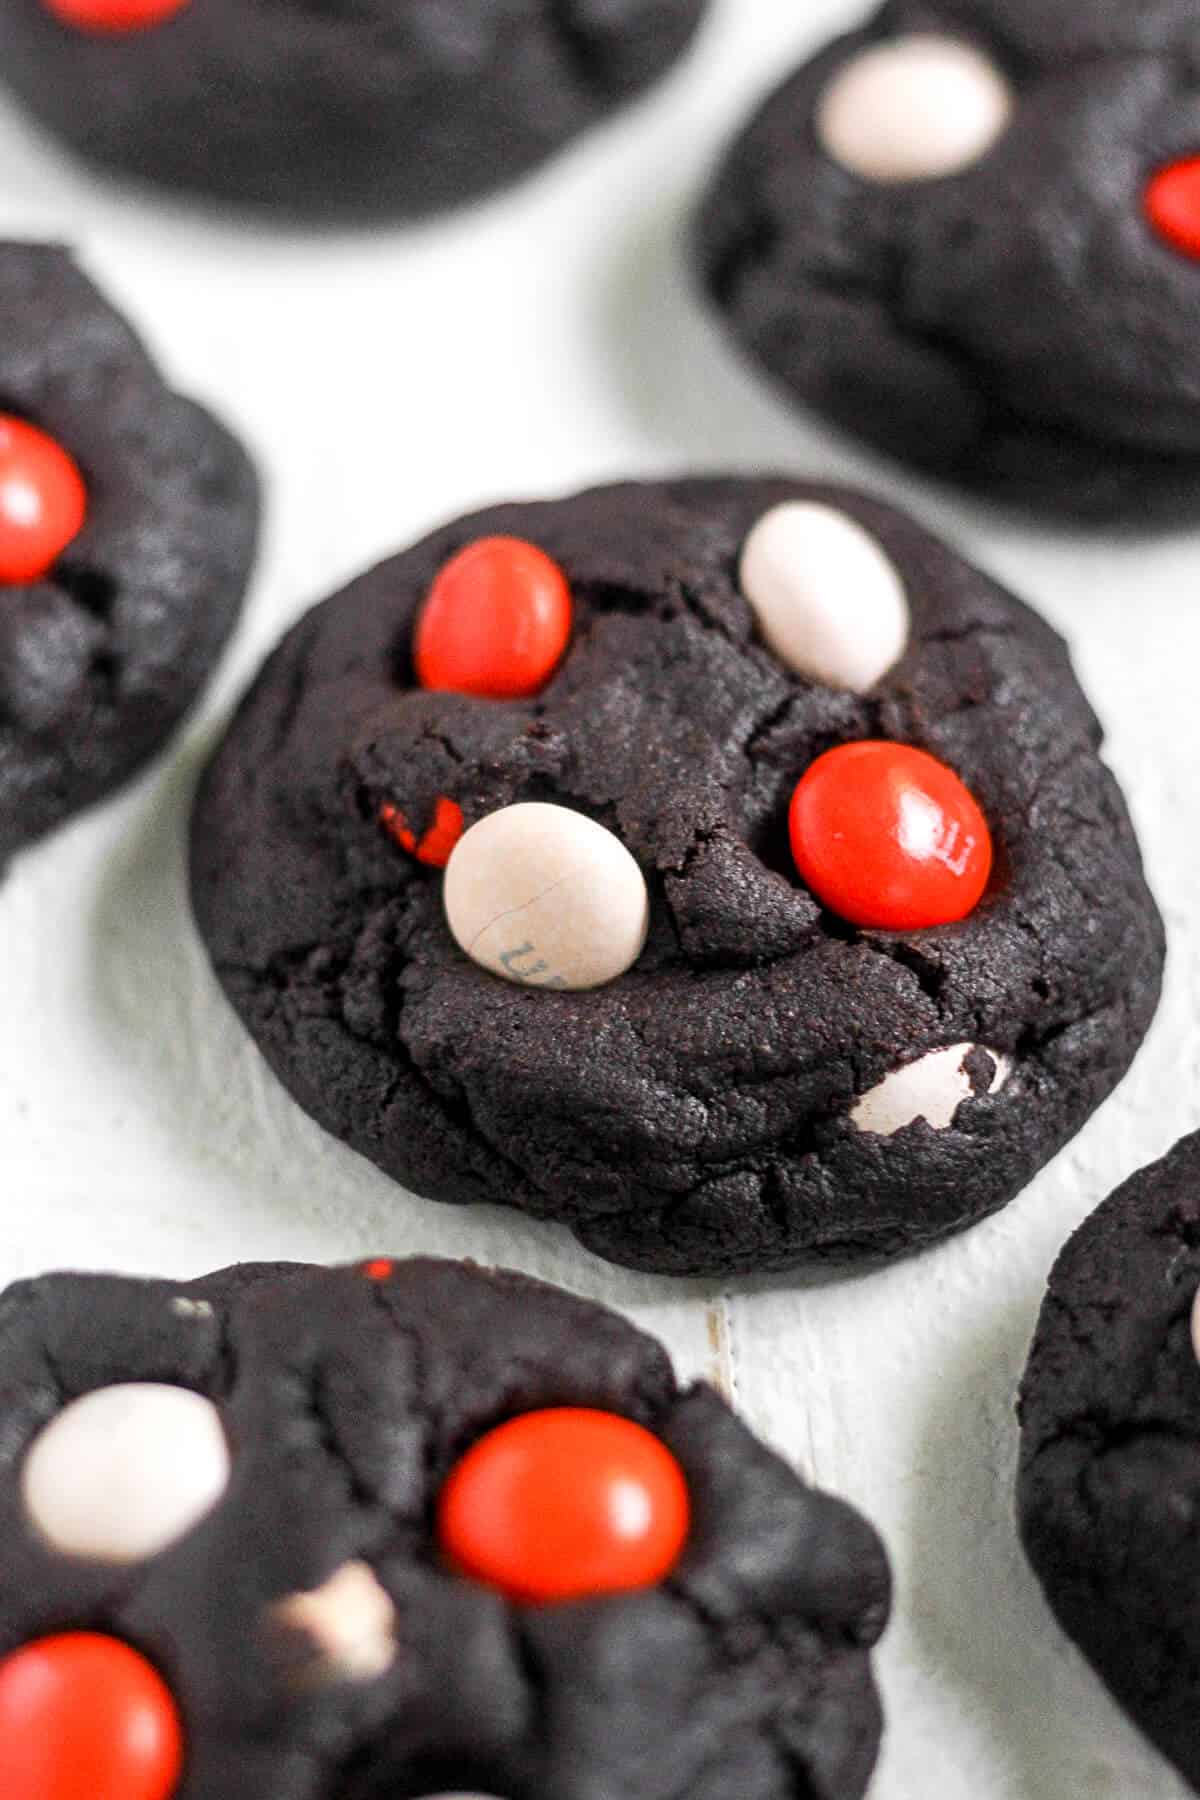 Get ready for your spooky celebration! These Dark Chocolate Halloween Cookies are a great addition to any party spread. They're soft, chewy, filled with chocolate and decorated with festive candy.